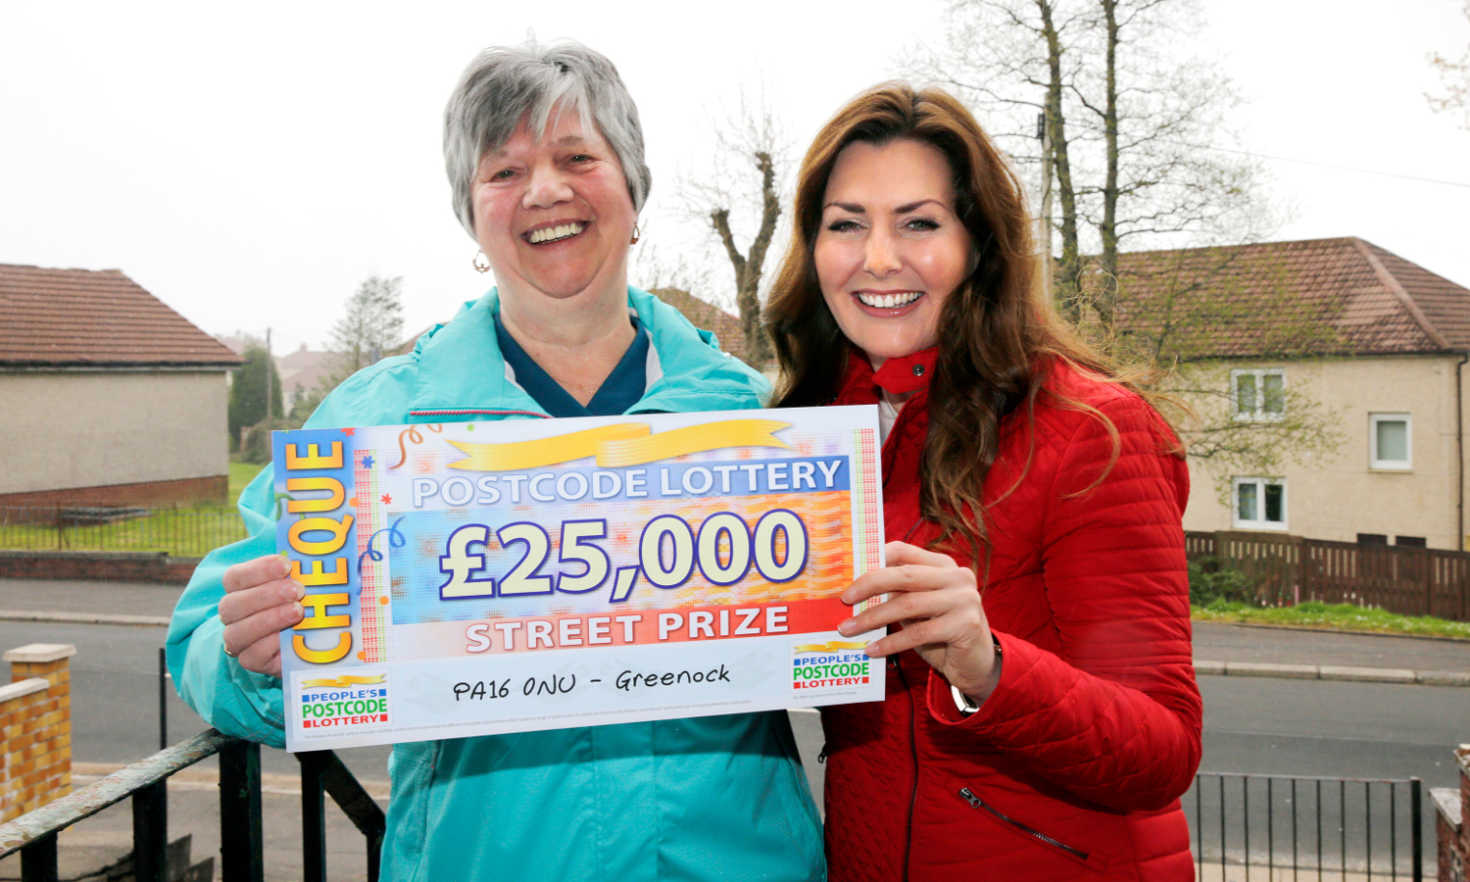 The Saturday Street Prize has landed in Greenock, and £25,000 winner Elizabeth Nairn could not be happier